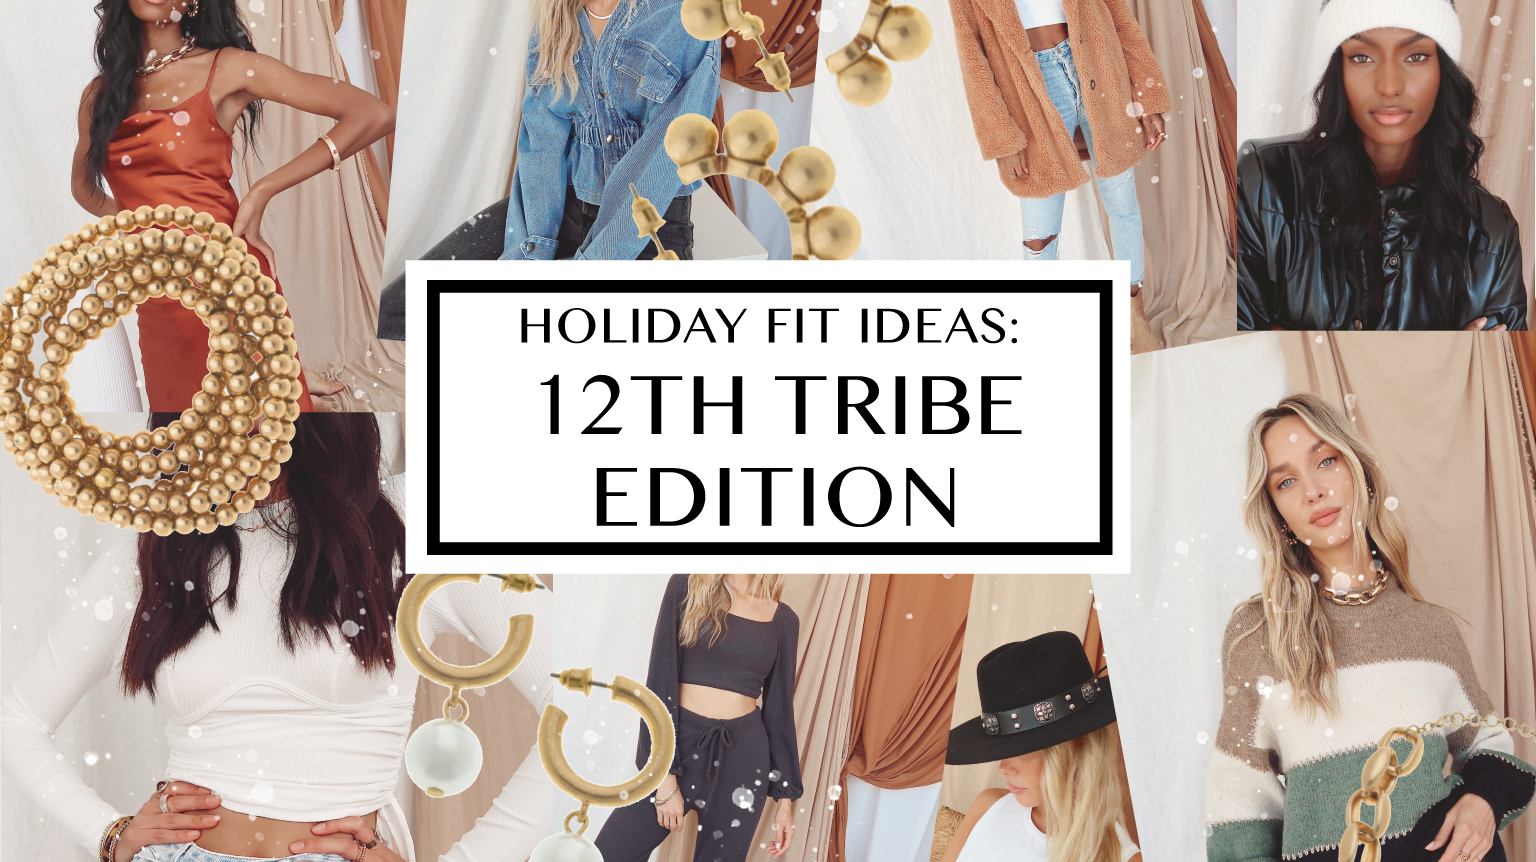 Holiday Fit Ideas: 12th Tribe Edition